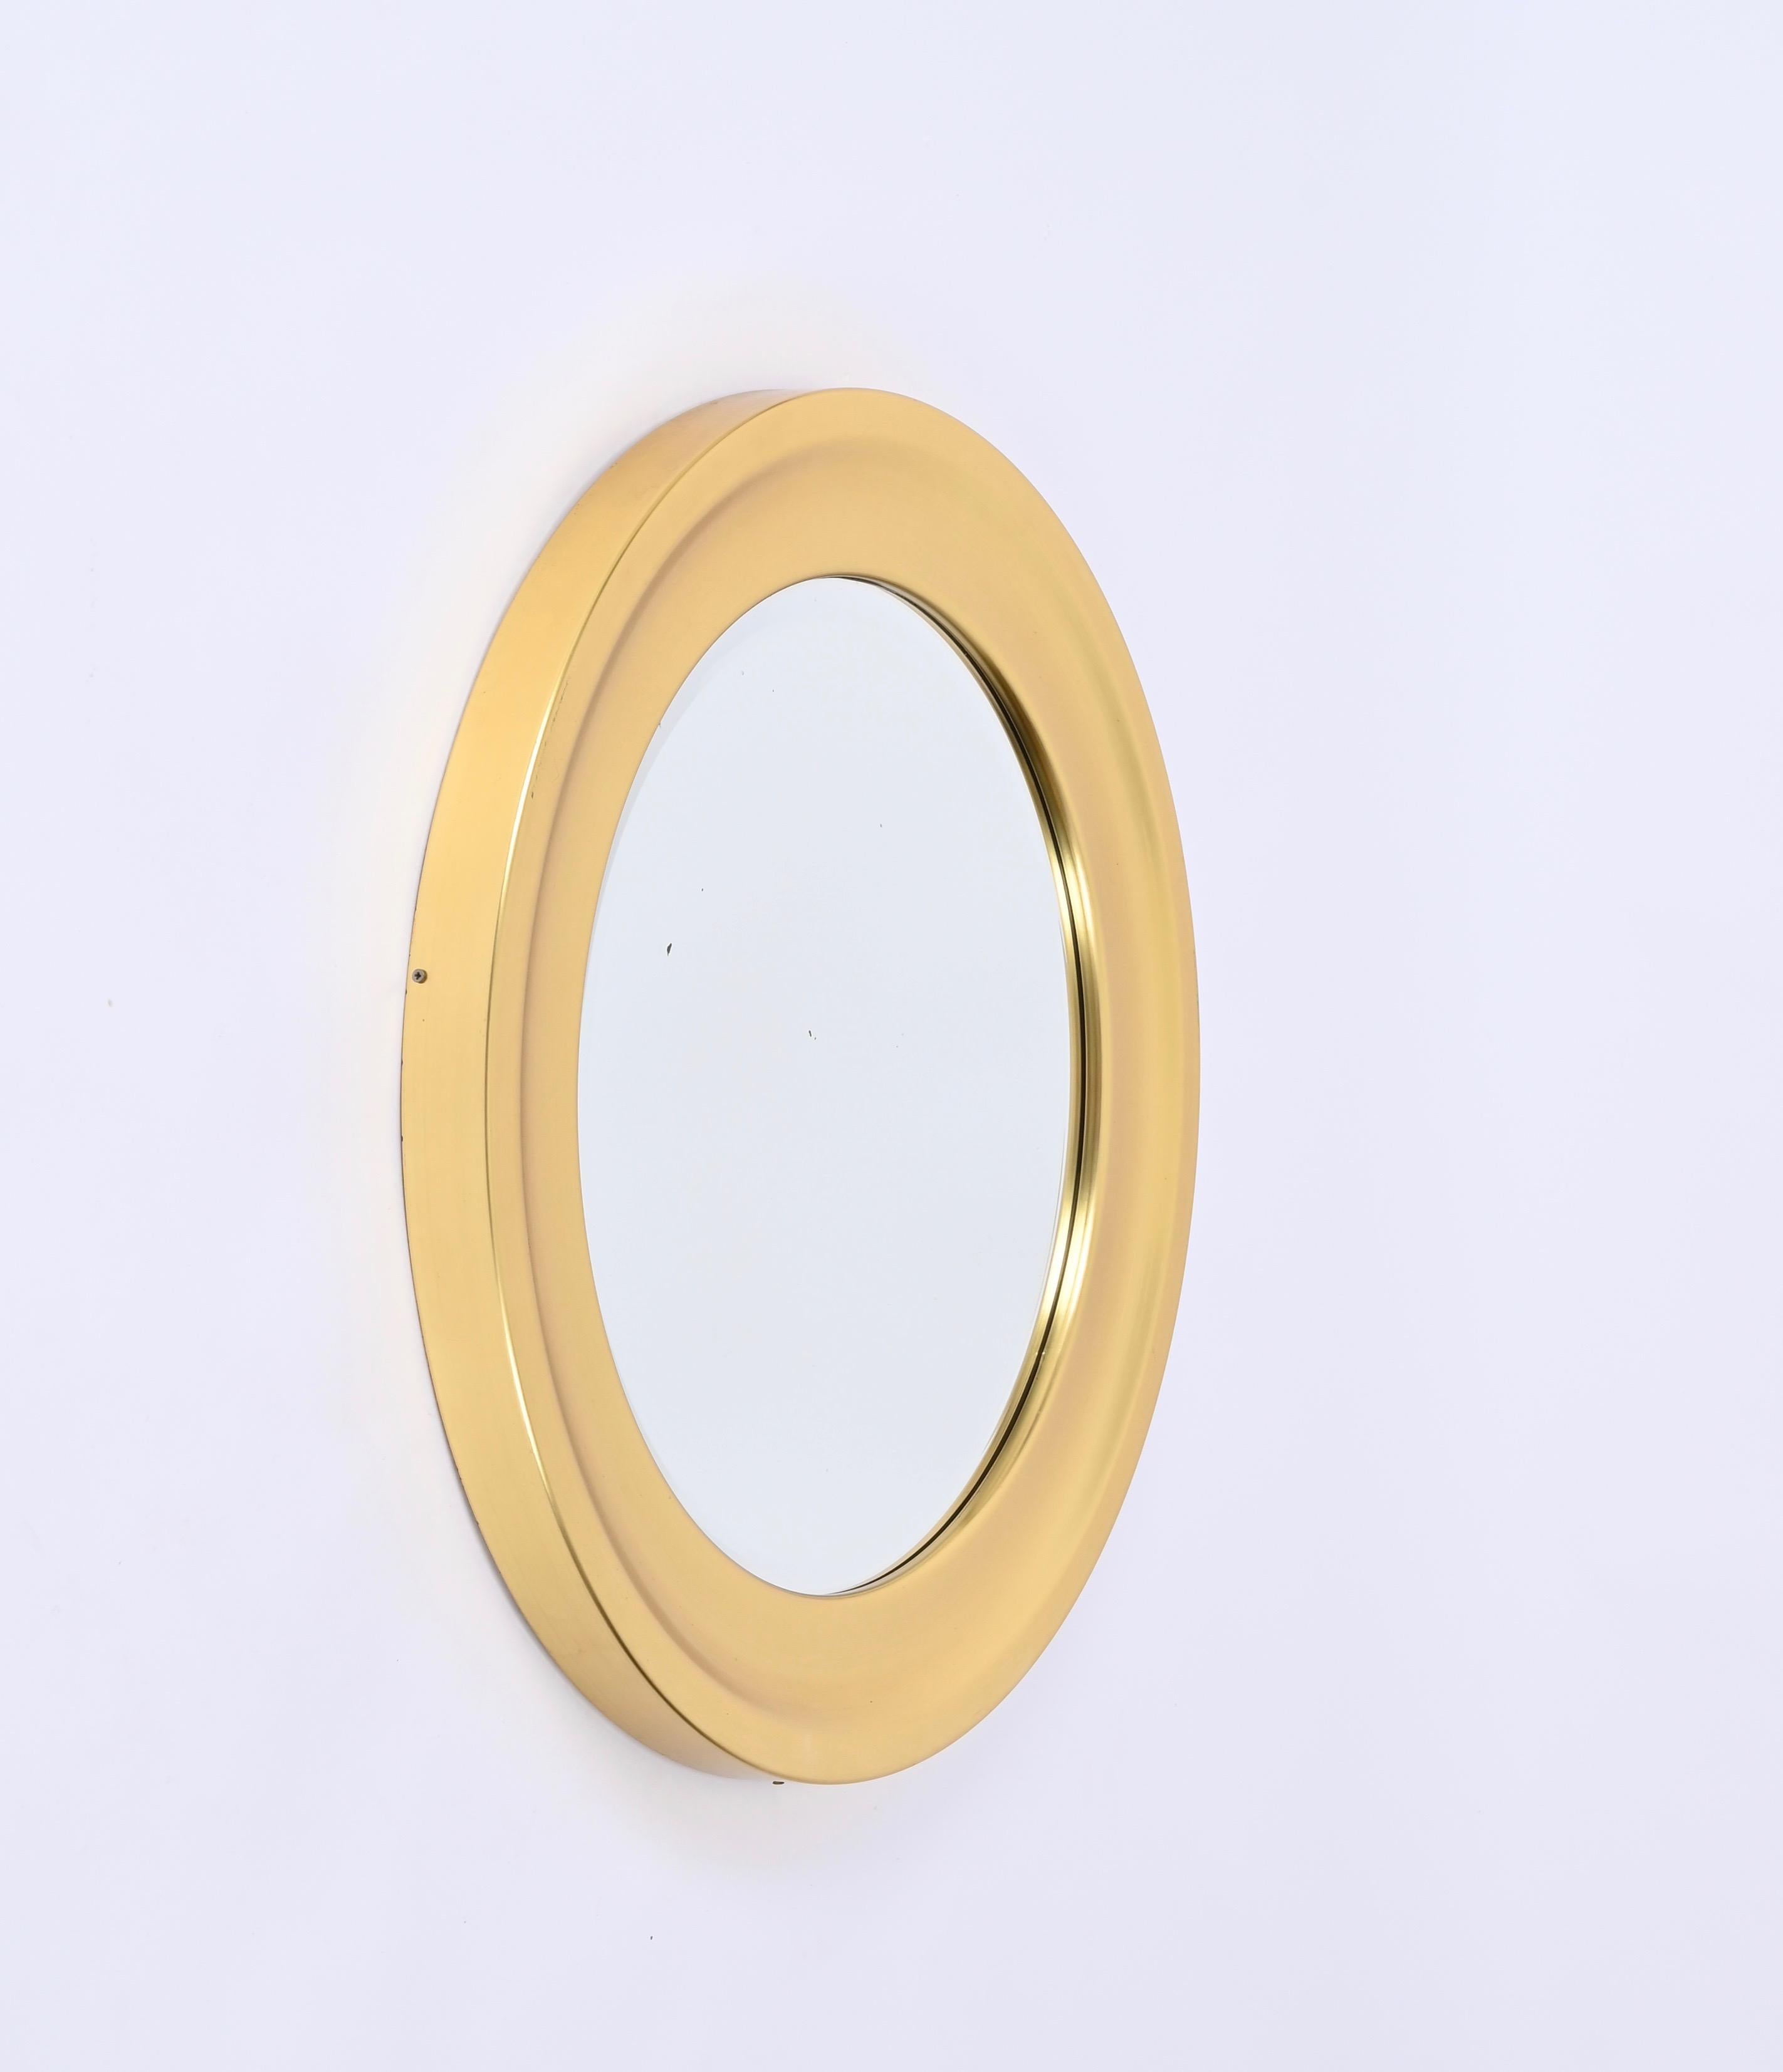 Sergio Mazza Midcentury Golden Aluminum Round Mirror for Artemide, Italy 1960s In Good Condition For Sale In Roma, IT